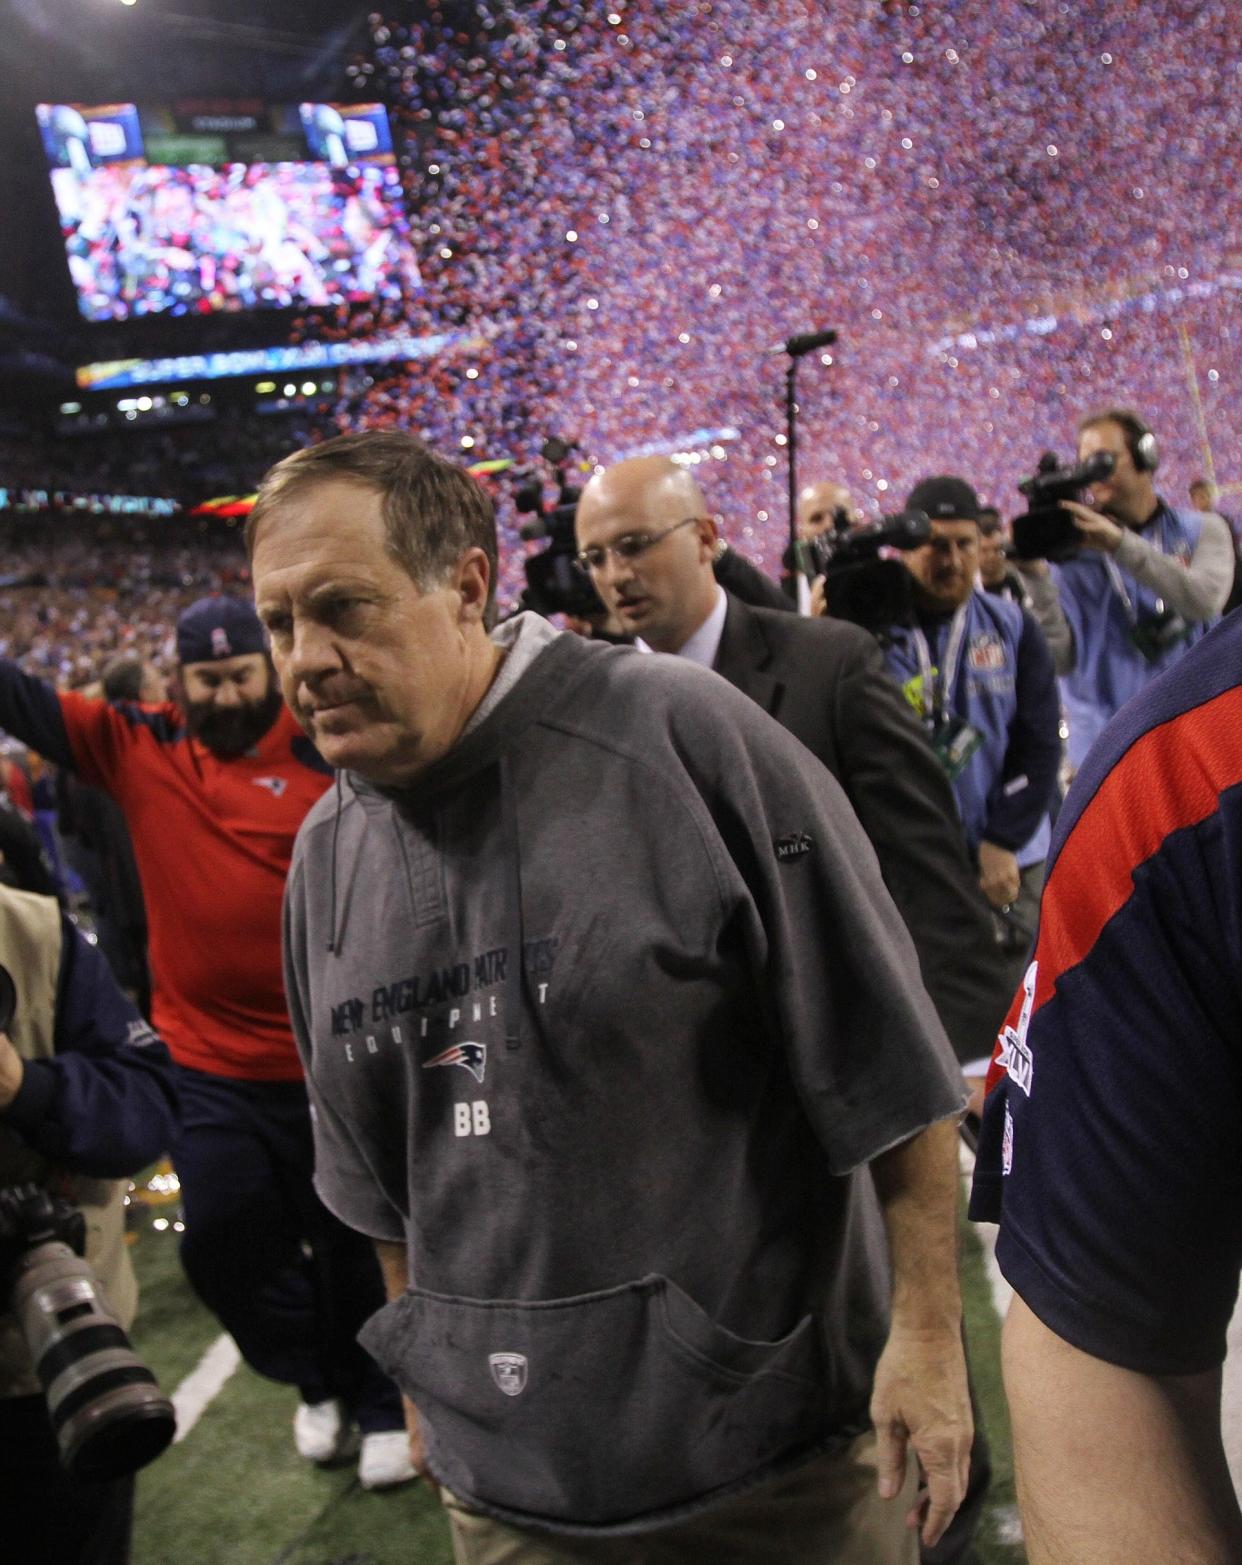 Indianapolis, IN February 5th, 2012 - - Belichick leaves the field.The New England Patriots play the New York Giants in Super Bowl XLVI at Lucas Oil Stadium in Indianapolis, Indiana.The Providence Journal/John Freidah